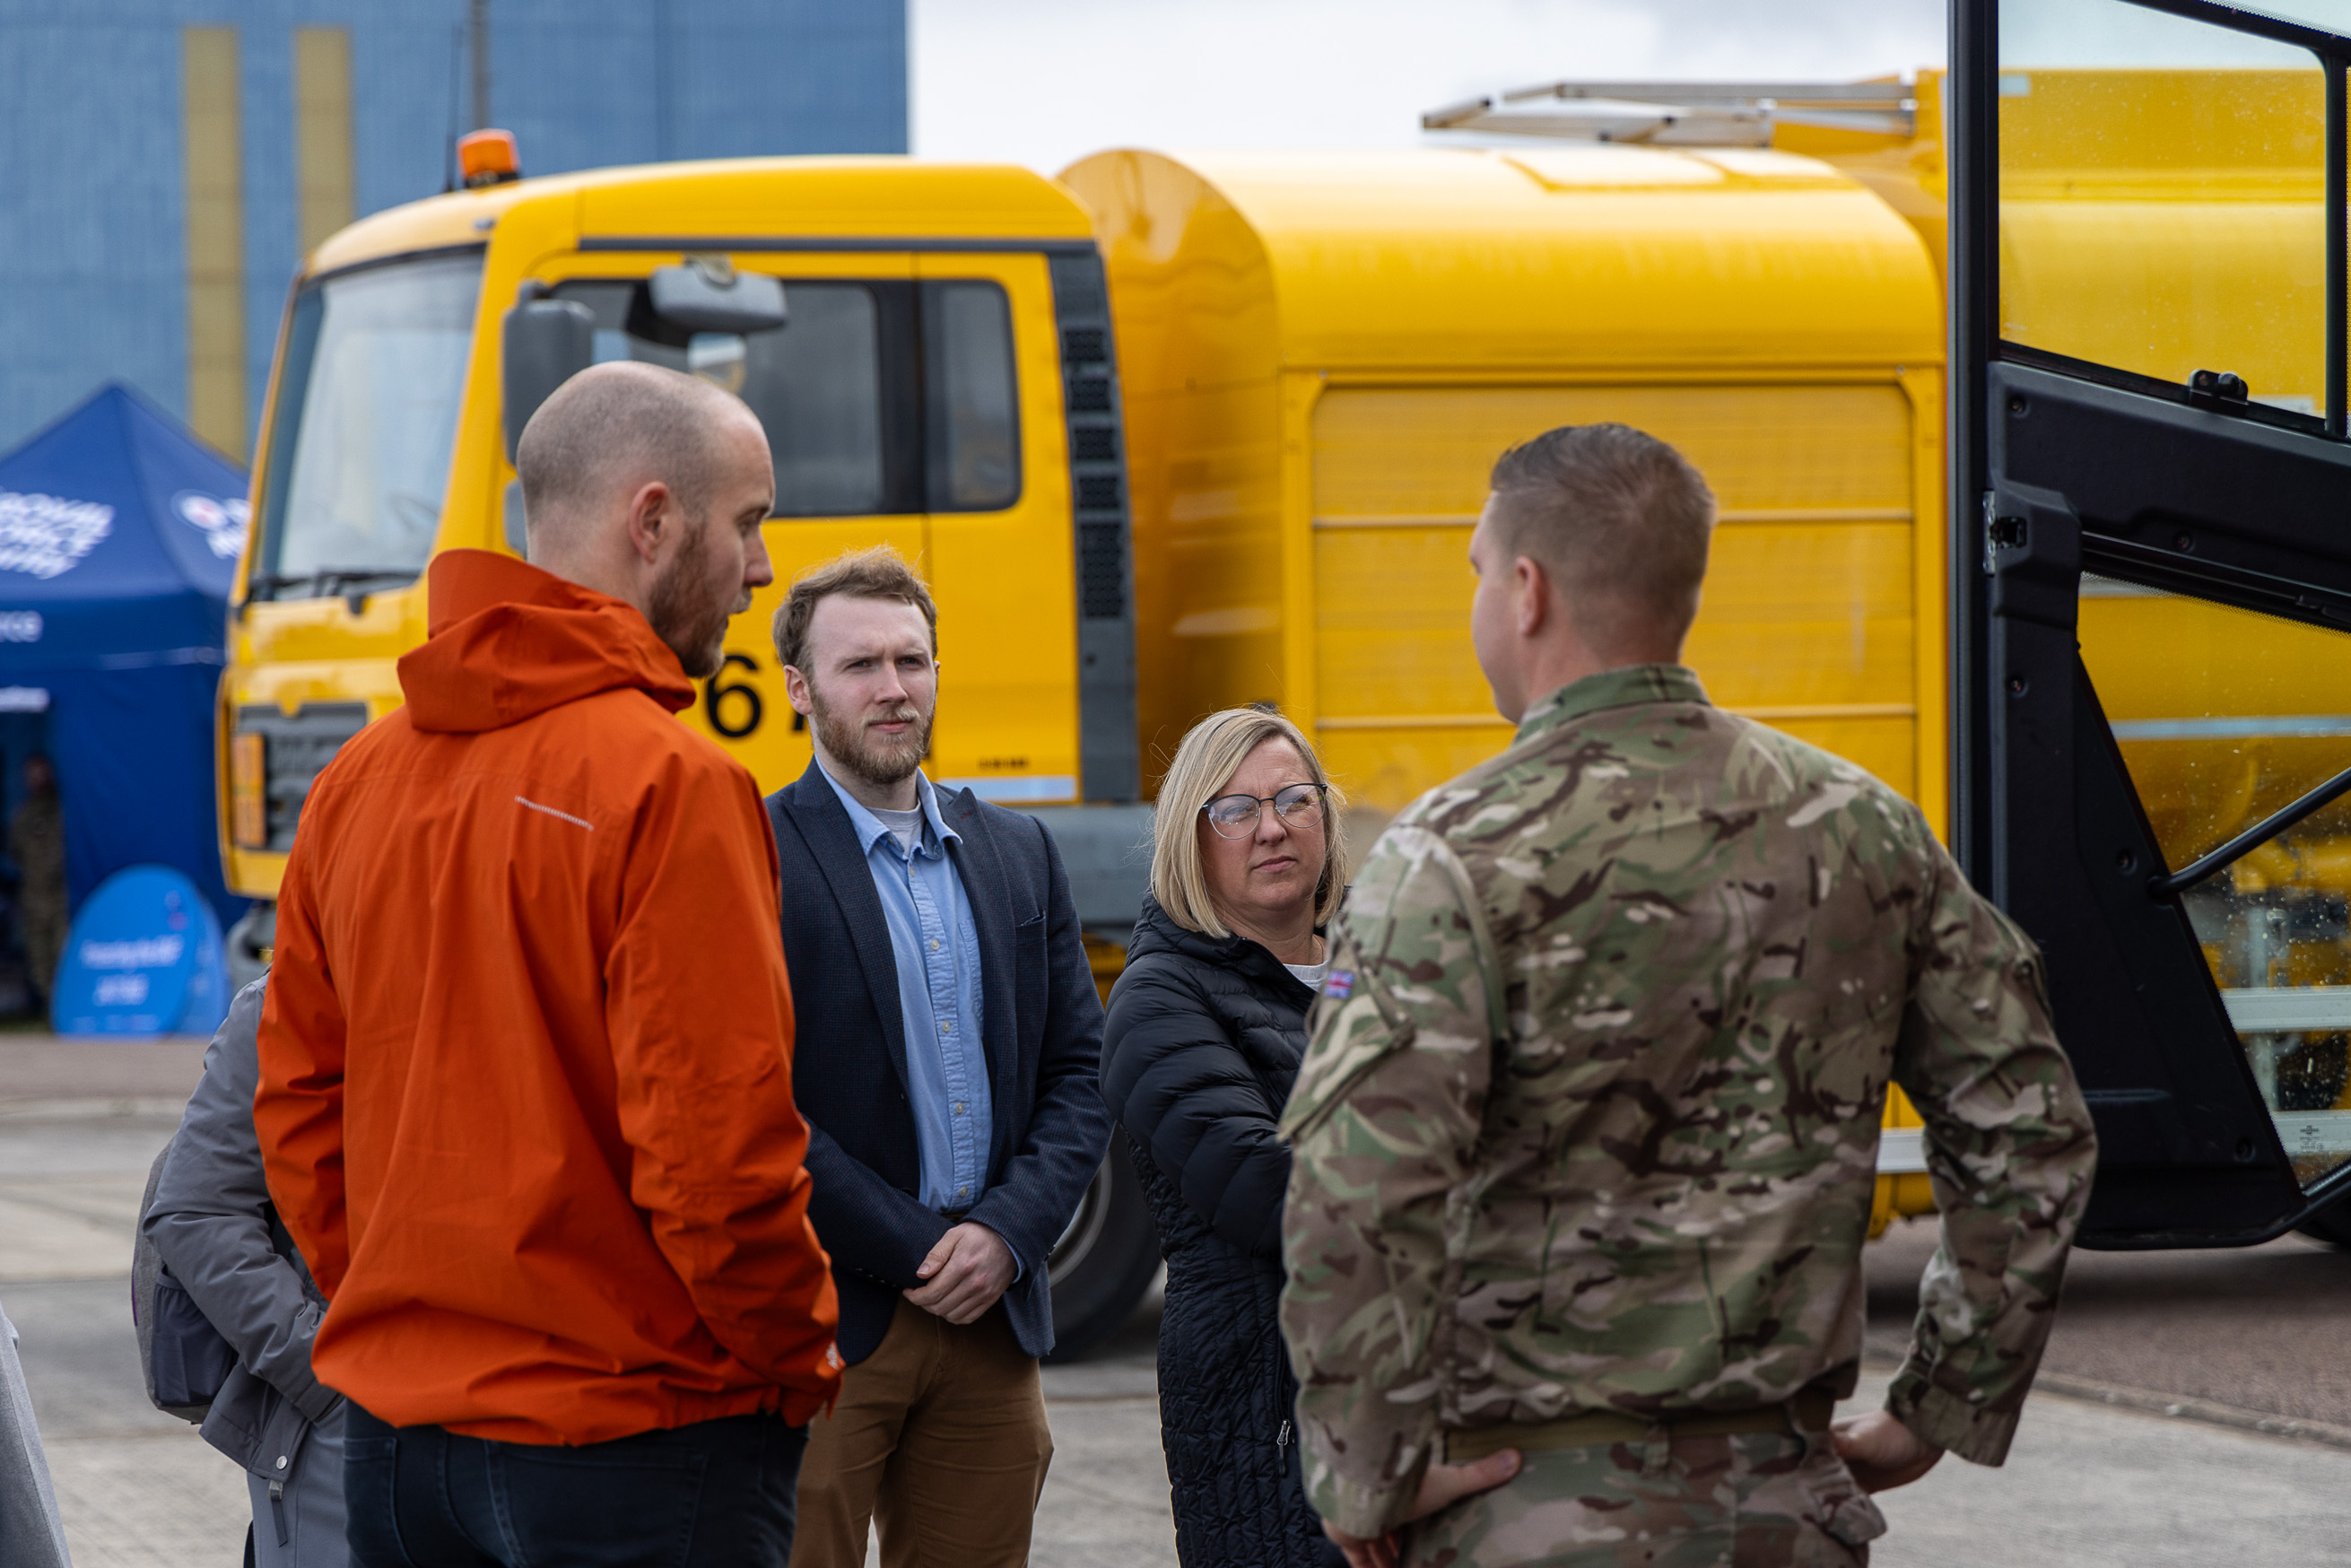 We have hosted members of the local community, key stakeholders, and military associations at the RAF Brize Norton Enterprise Day